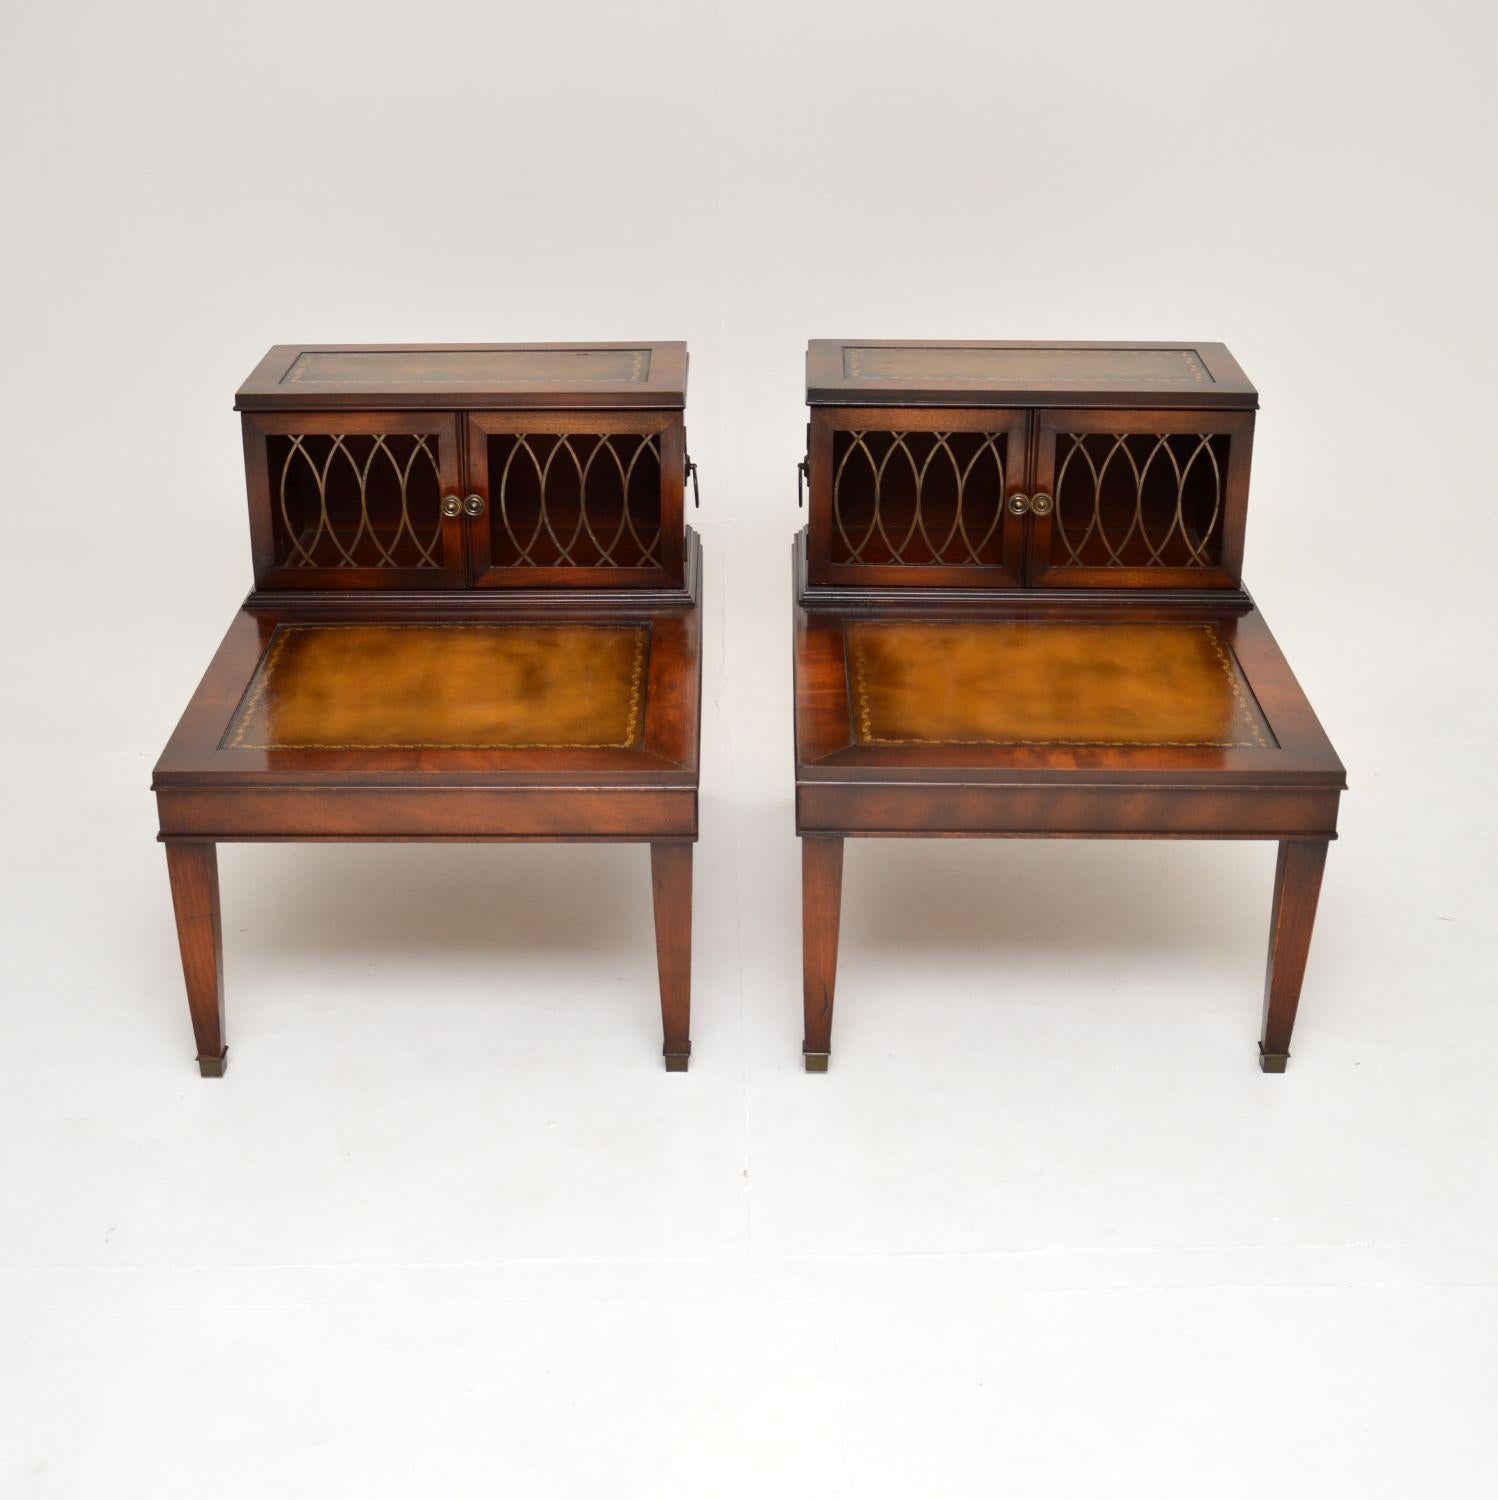 A large and very impressive pair of antique leather top side tables in the Georgian style, dating from around the 1930-50’s.

The quality is excellent, they are a great size and have useful cabinet sections at the backs with pierced brass door